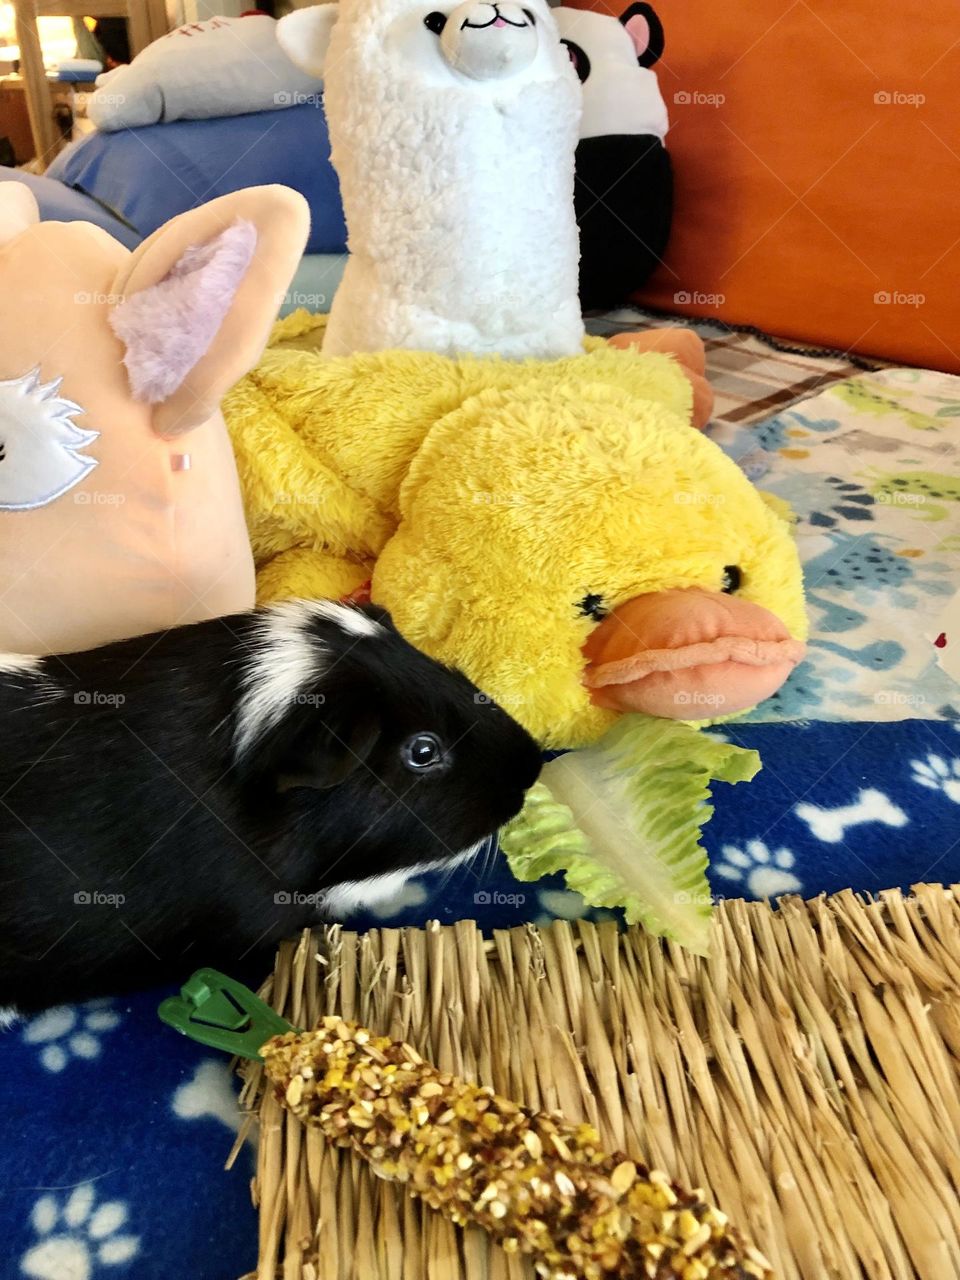 Timmy with his ducky toy / family pet Guinea pig 